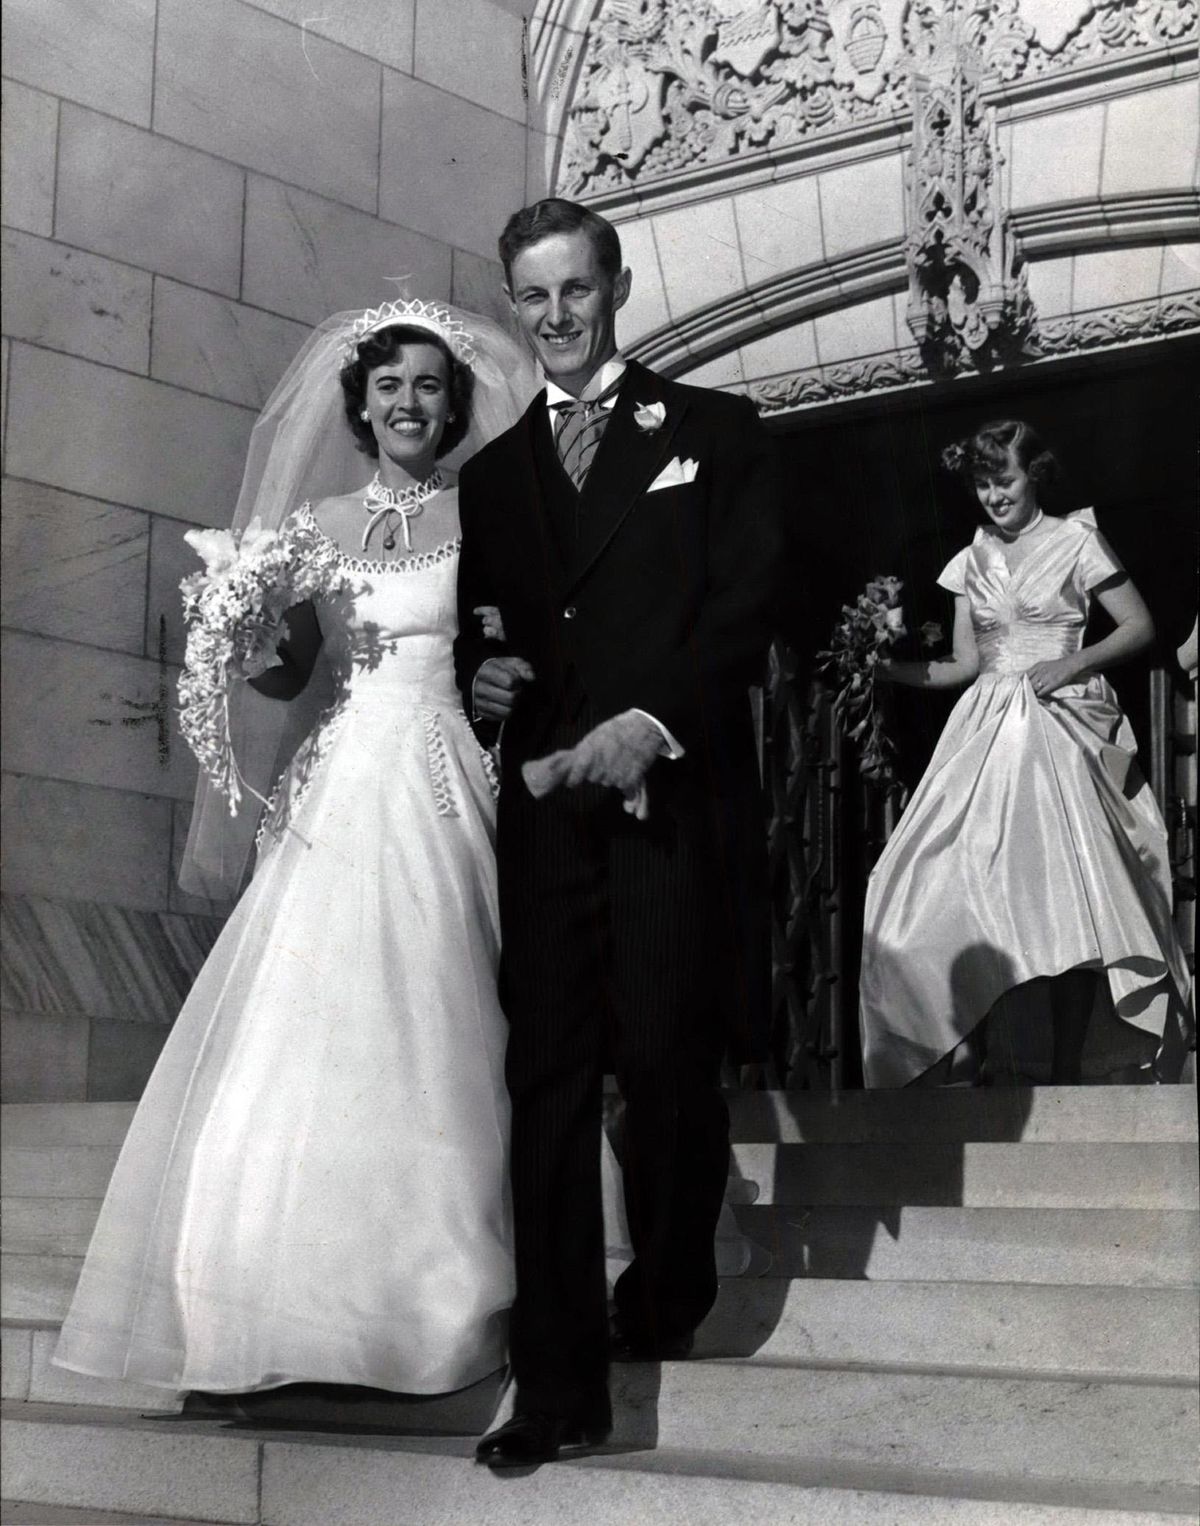 Harriet and William C. Fix on their wedding day in 1950. (PHOTO ARCHIVE / SR)